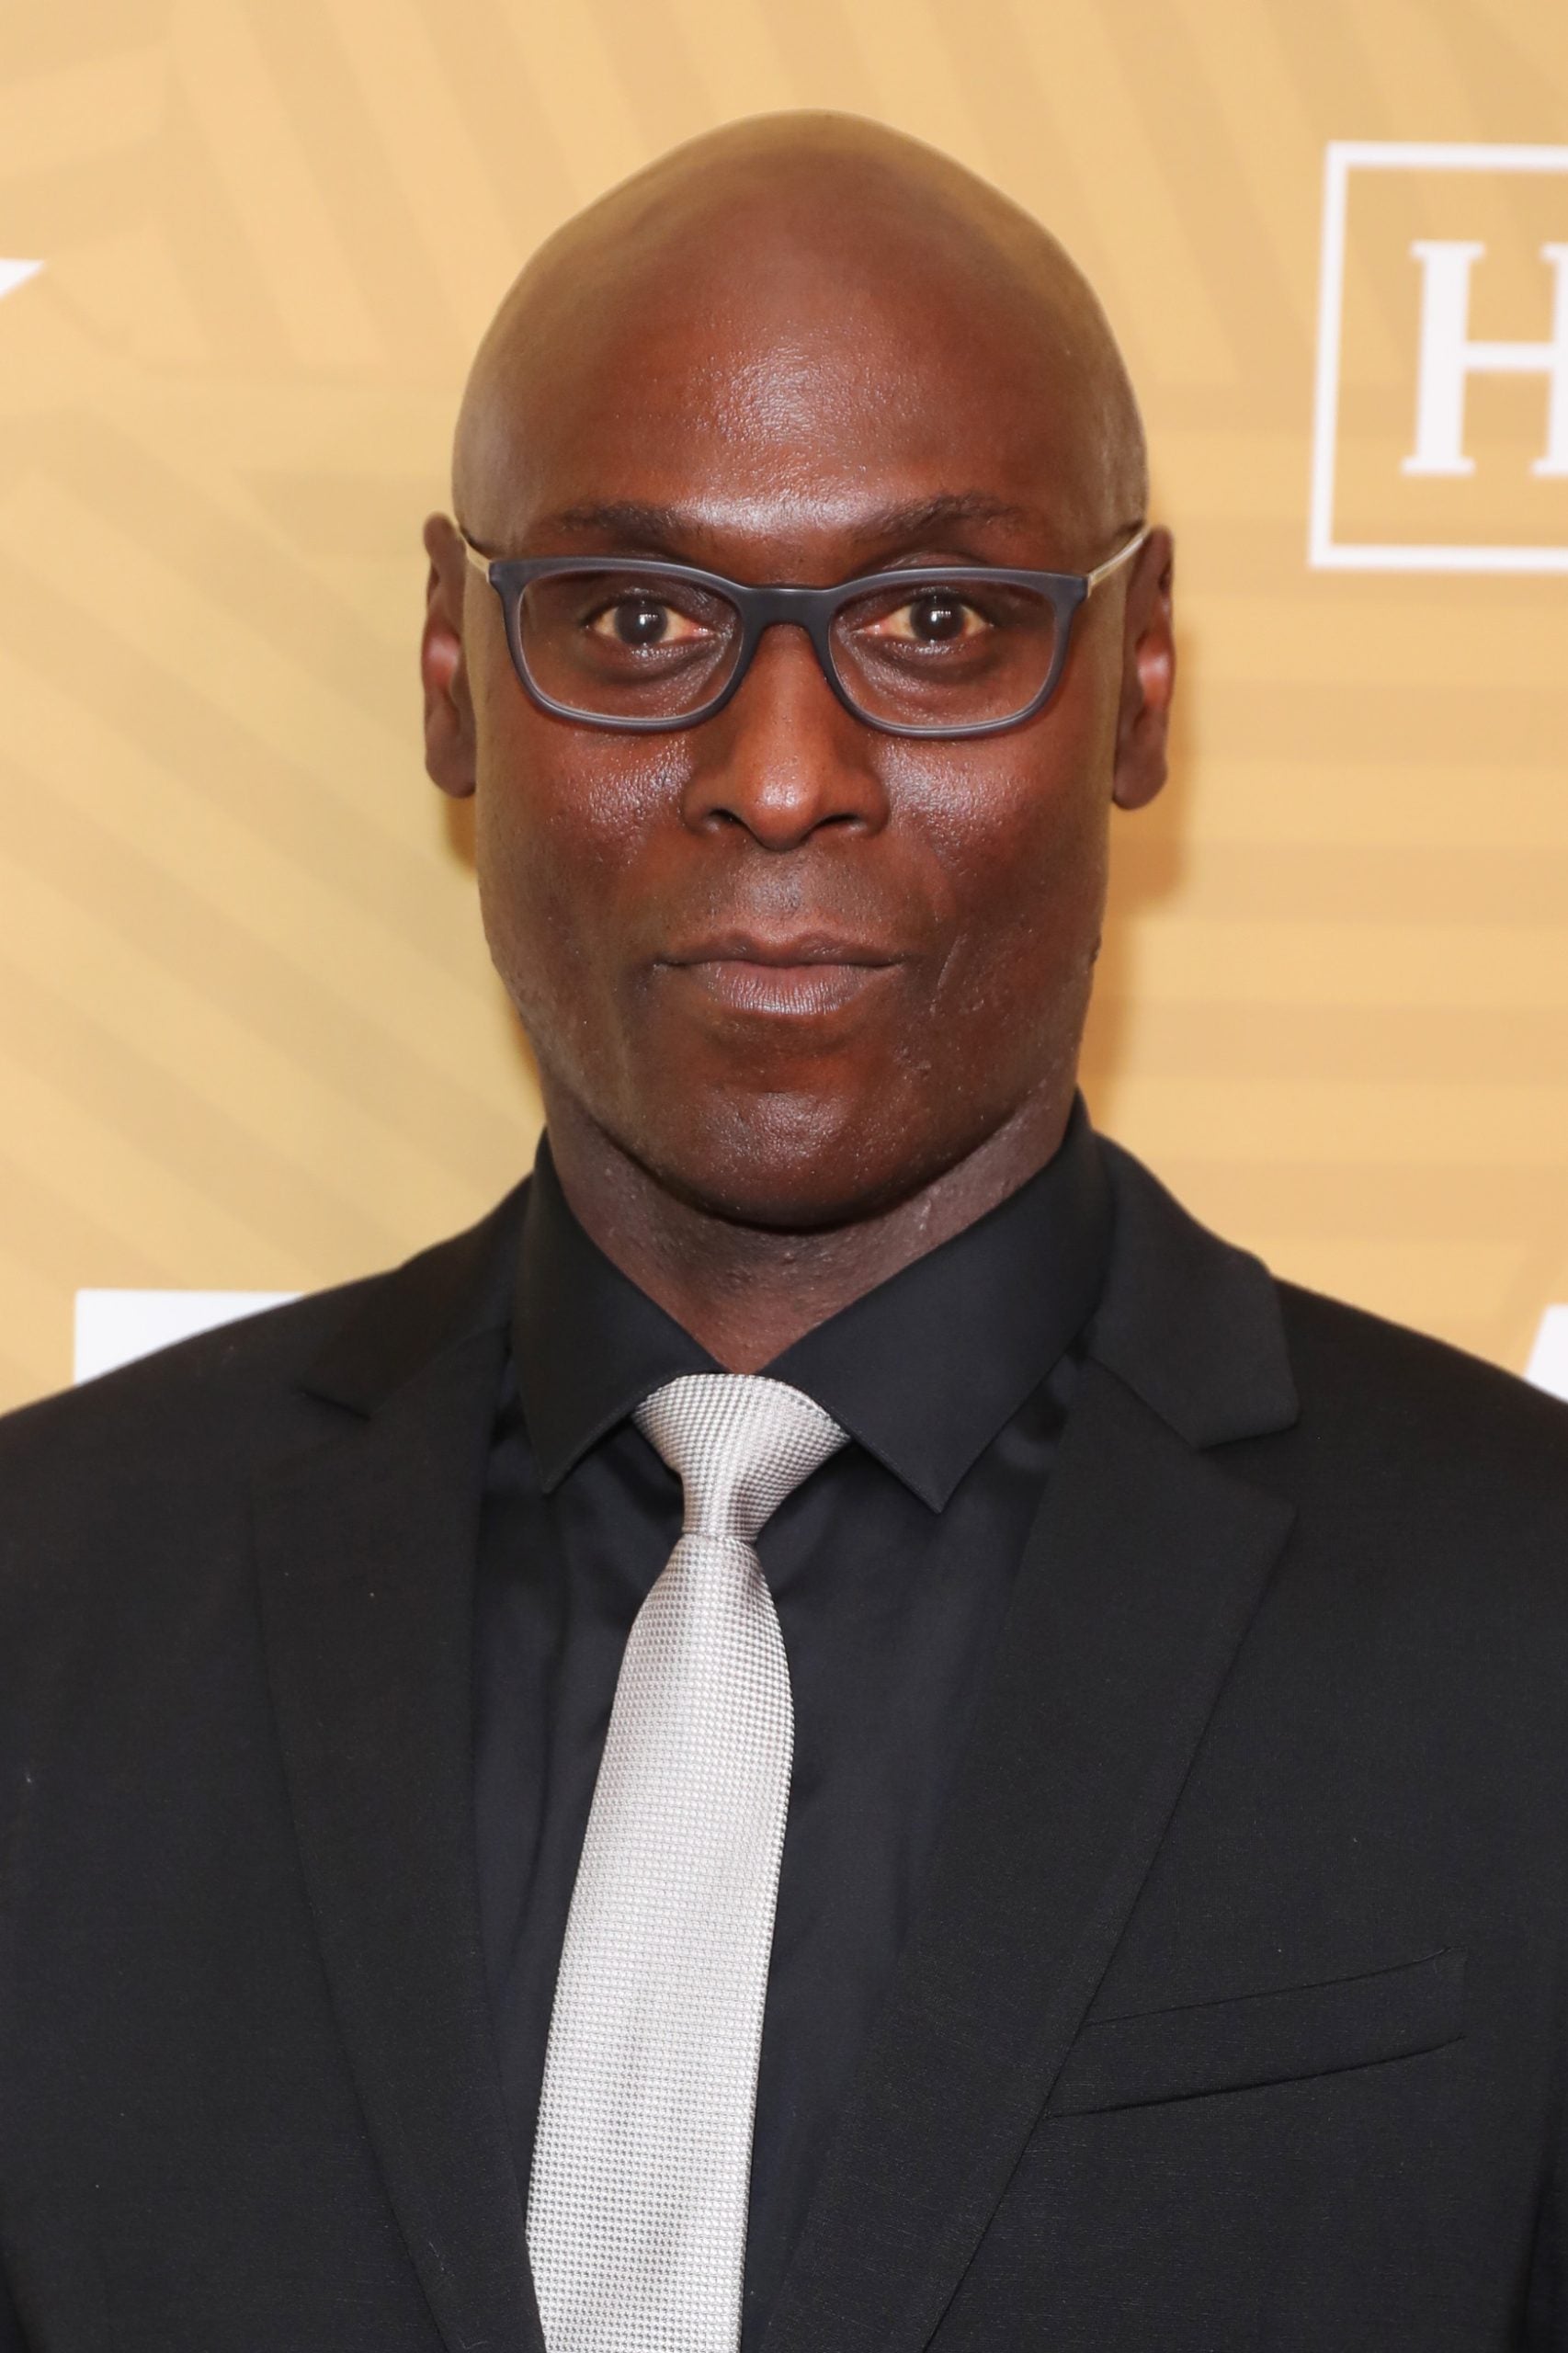 The Last TV Show Lance Reddick Was In Before He Died